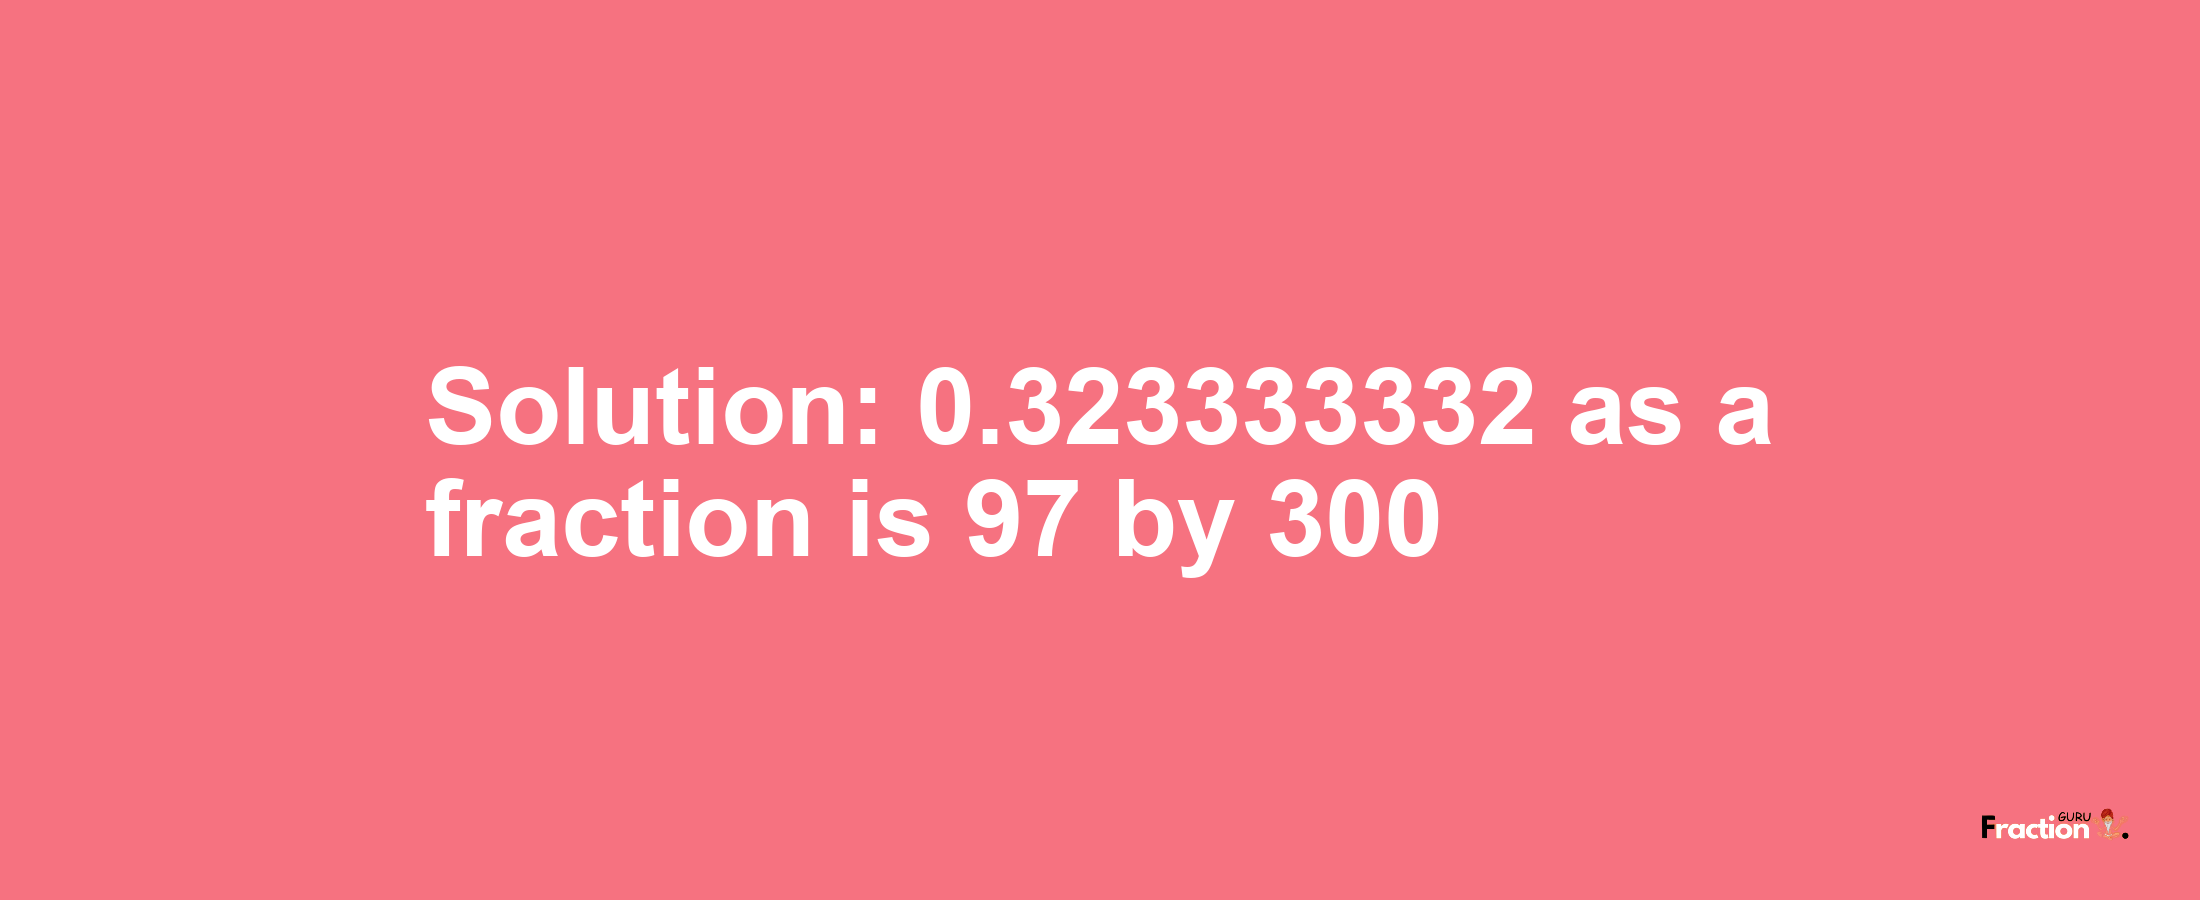 Solution:0.323333332 as a fraction is 97/300